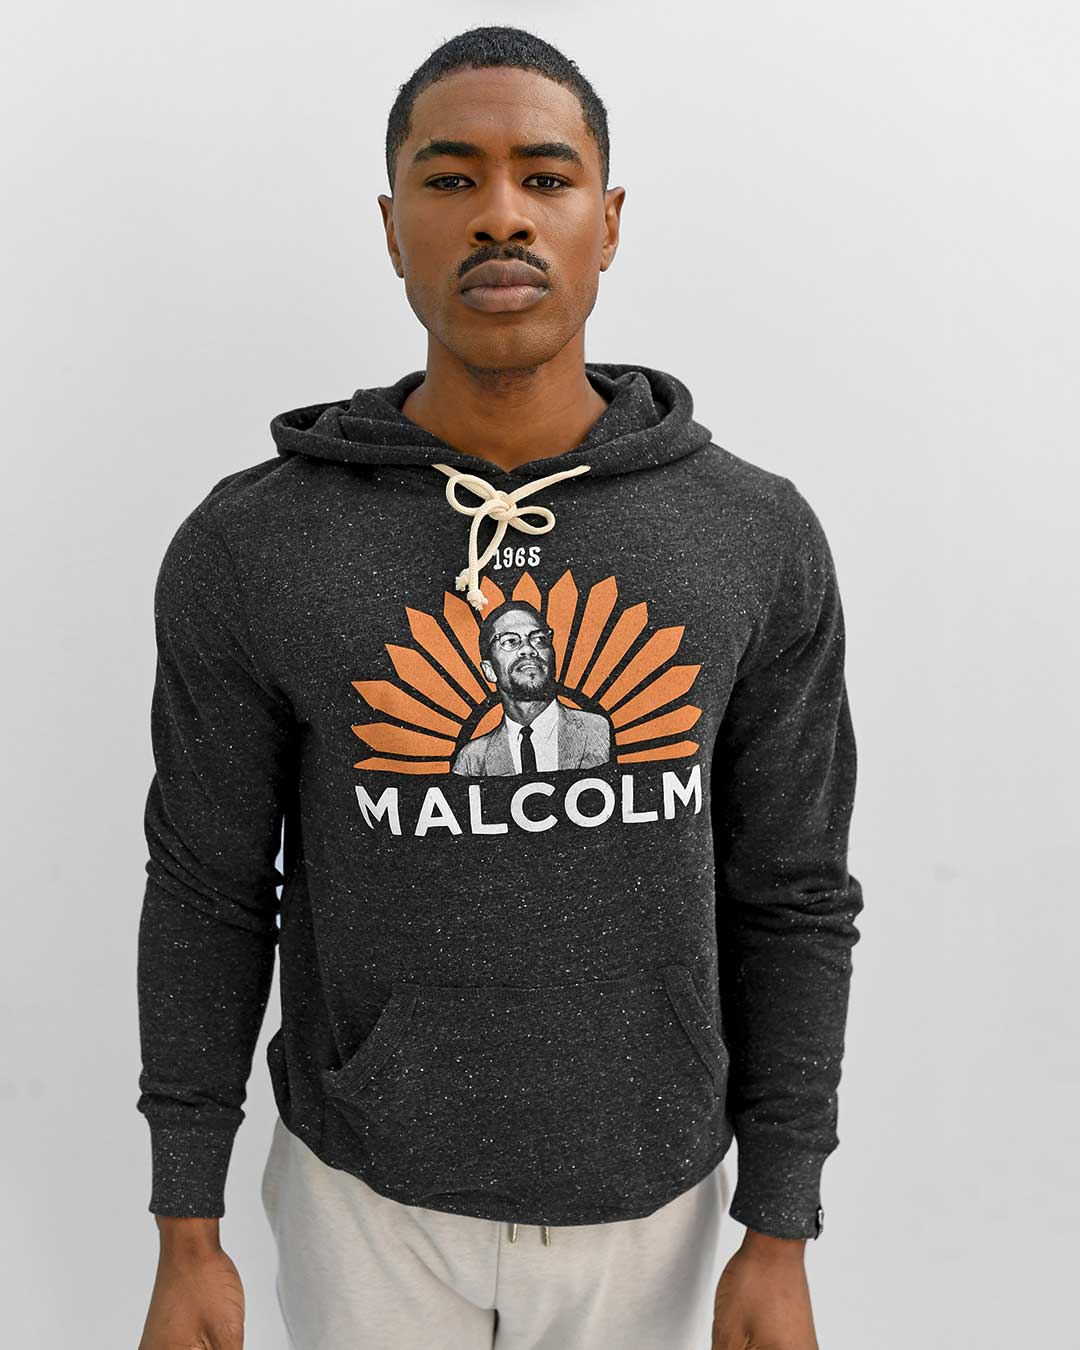 Malcolm X 1965 Black PO Hoody - Roots of Fight